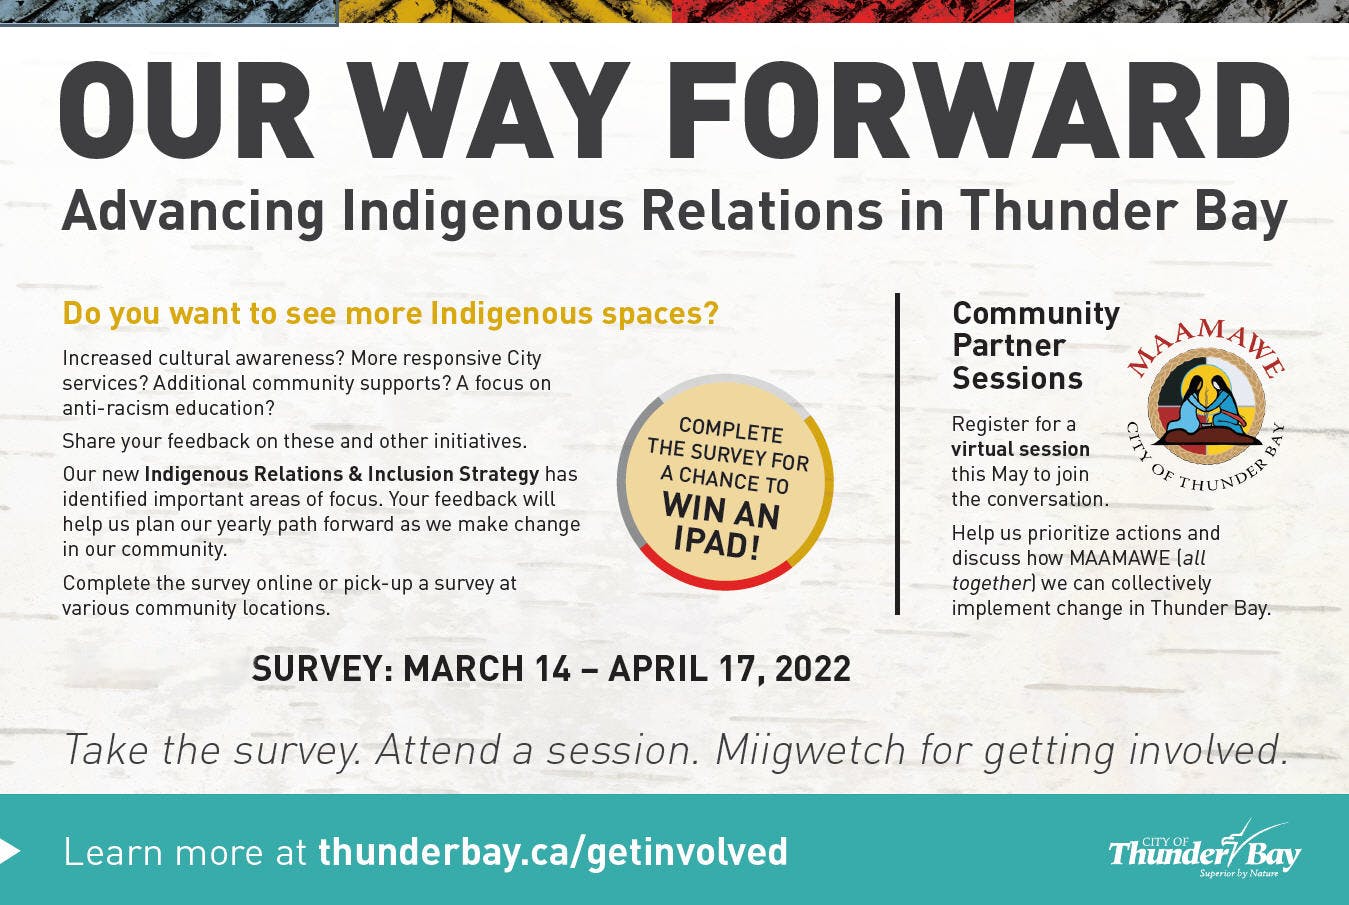 Our Way Forward: Advancing Indigenous Relations in Thunder Bay